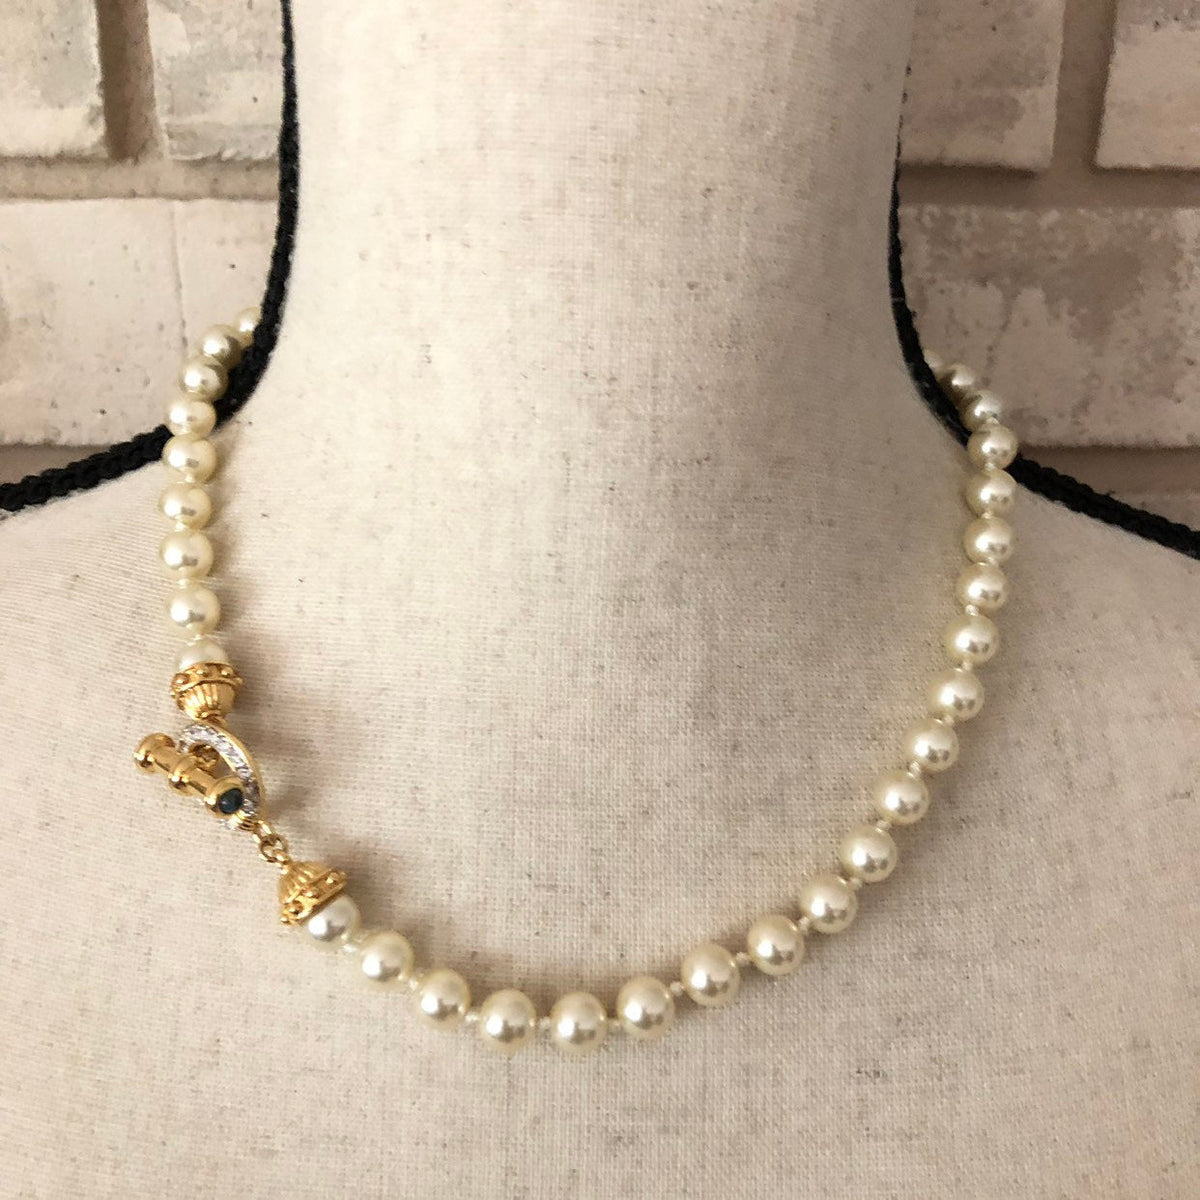 Nolan Miller White Classic Pearls Necklace Rhinestone Toggle Closure - 24 Wishes Vintage Jewelry